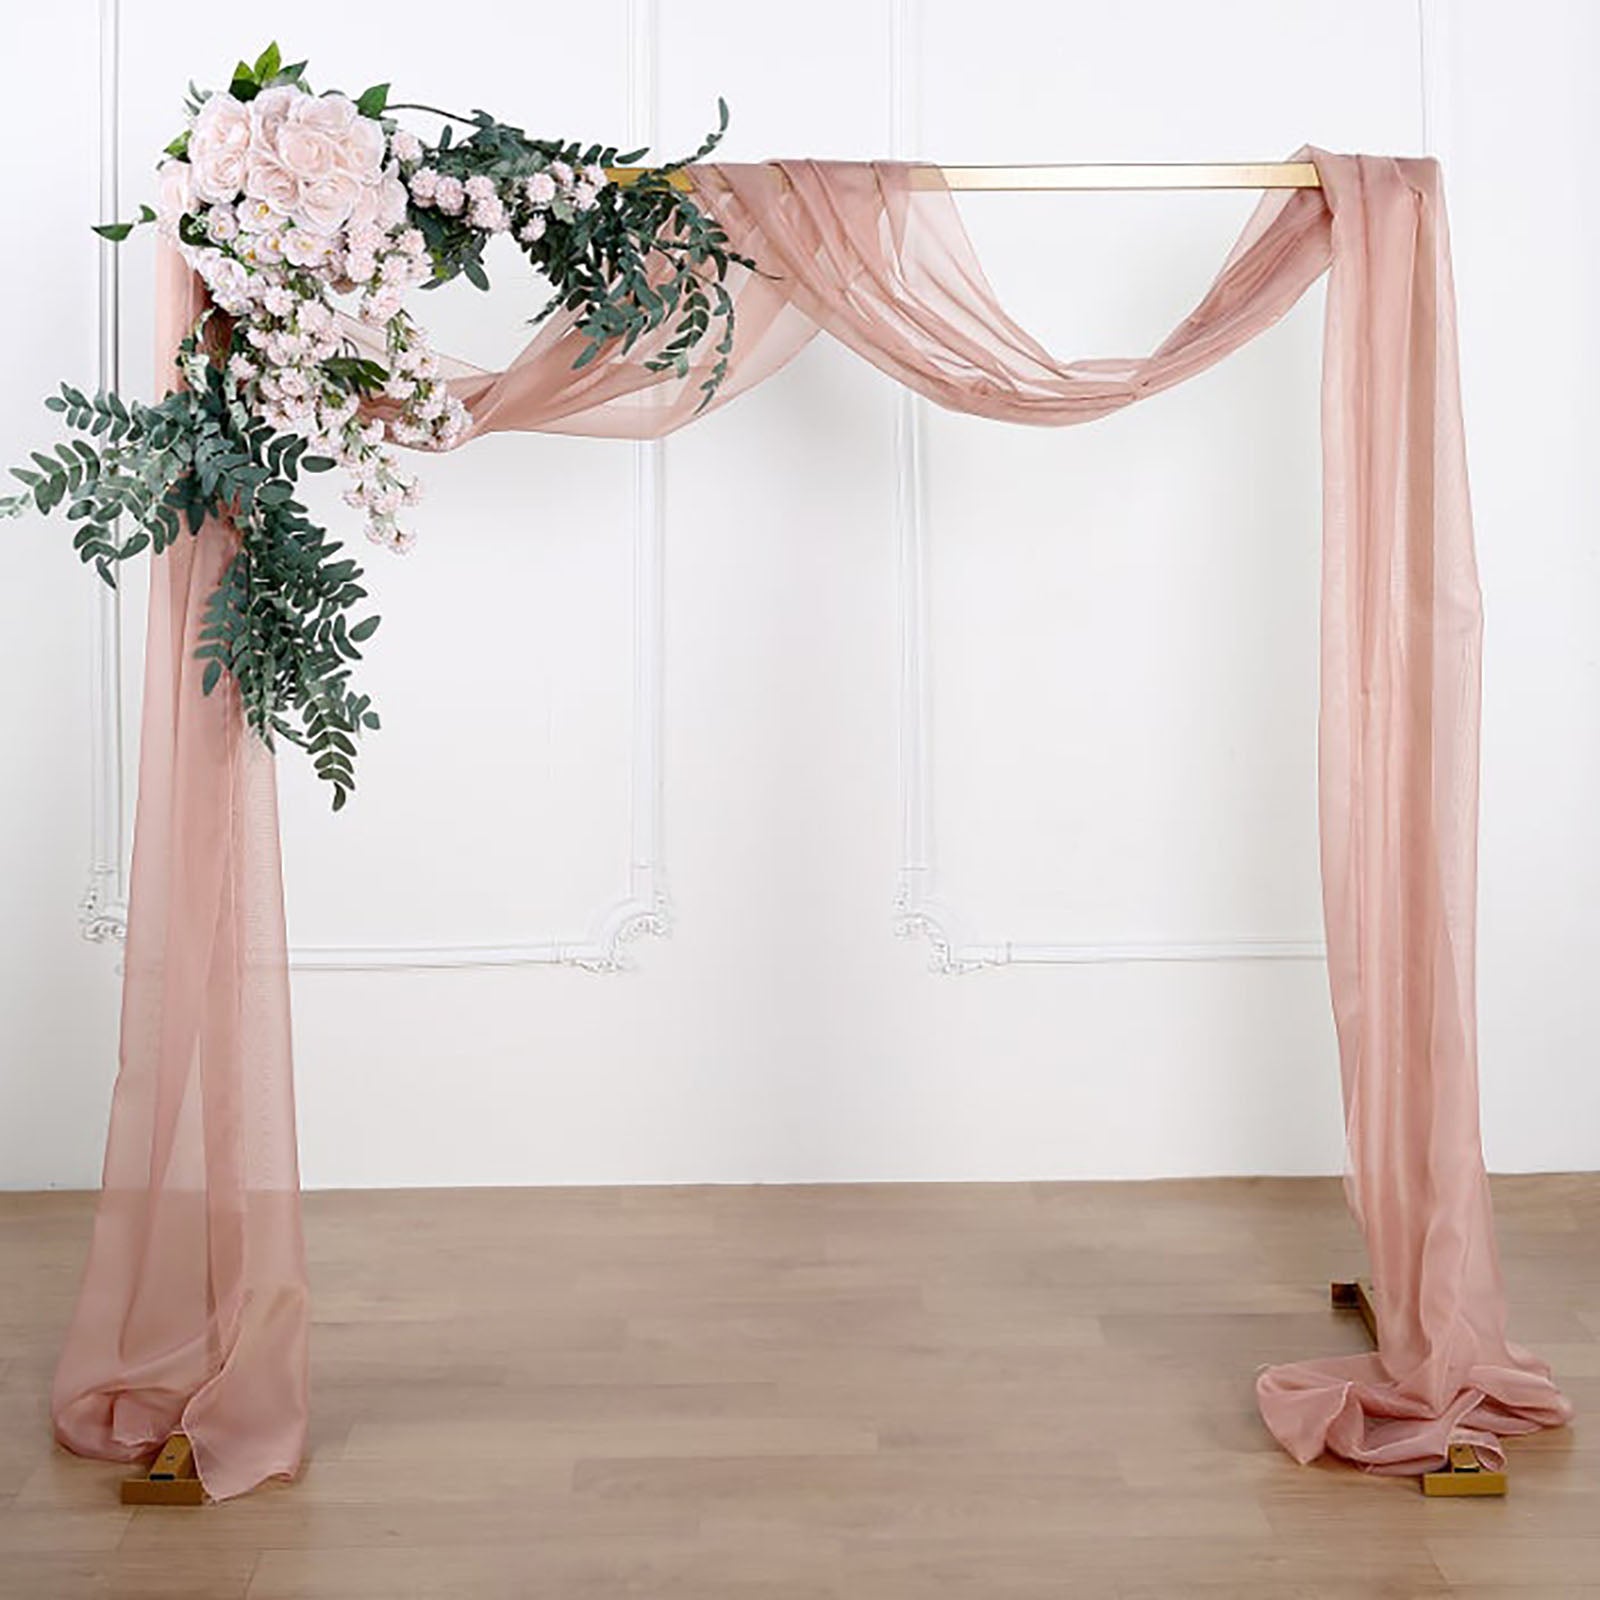 Wedding Arch Flowers  Flower Arch Decor with Drapes - Dusty Rose